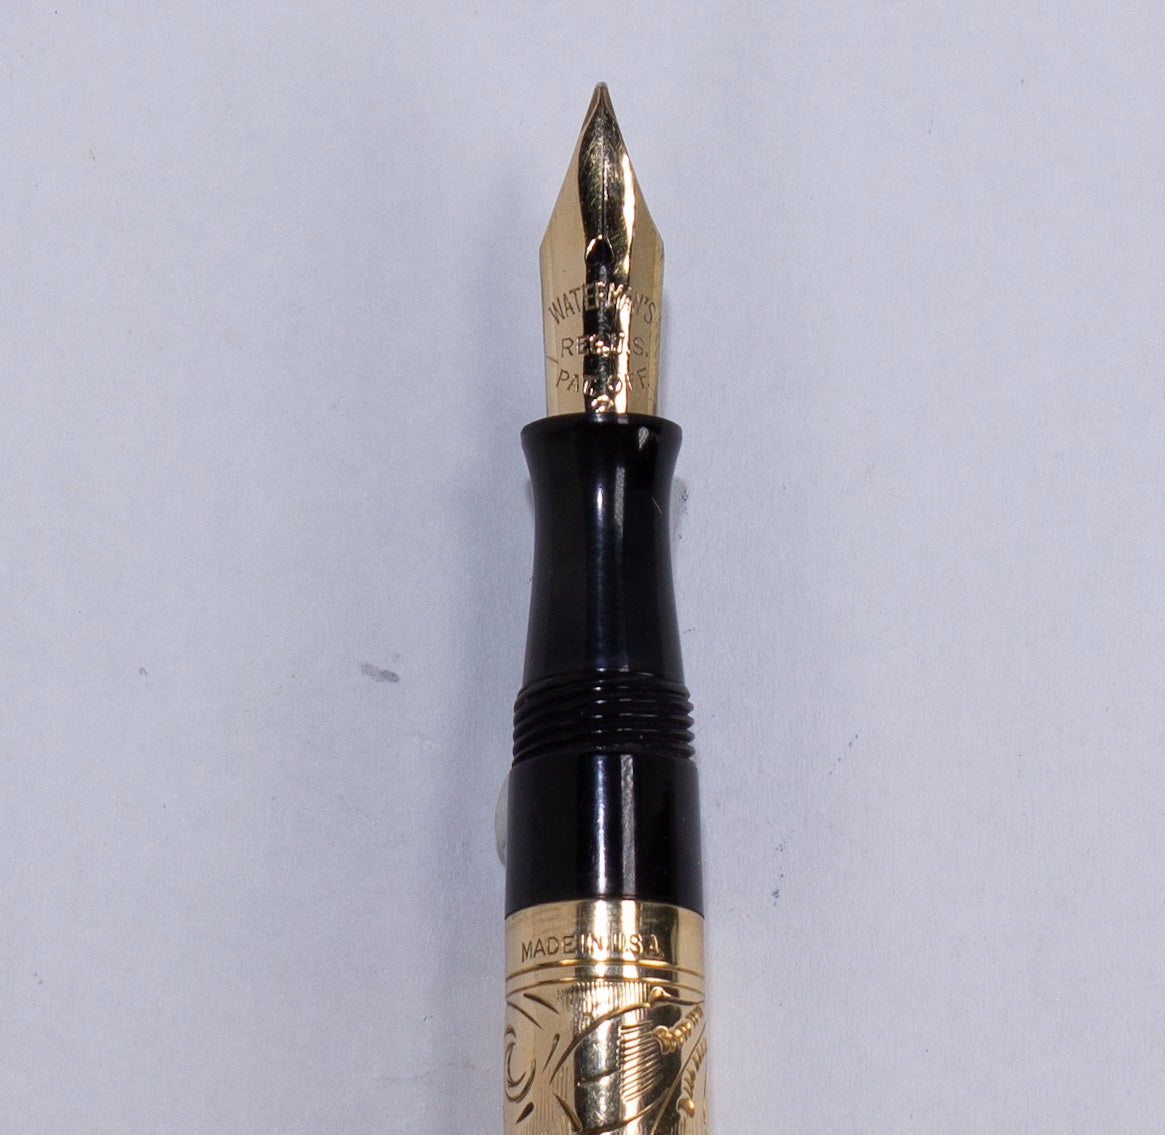 ${titleName/Type: Waterman 0552 1/2 V Manufacture Year: 1920s Length: 3 1/2 Filling System: Lever Filler Restored with a new sac. Color/Pattern: Gold filled cap and barrel, hand engraved flowers and vines Nib Type/Condition and remarks: 14K Gold Waterman